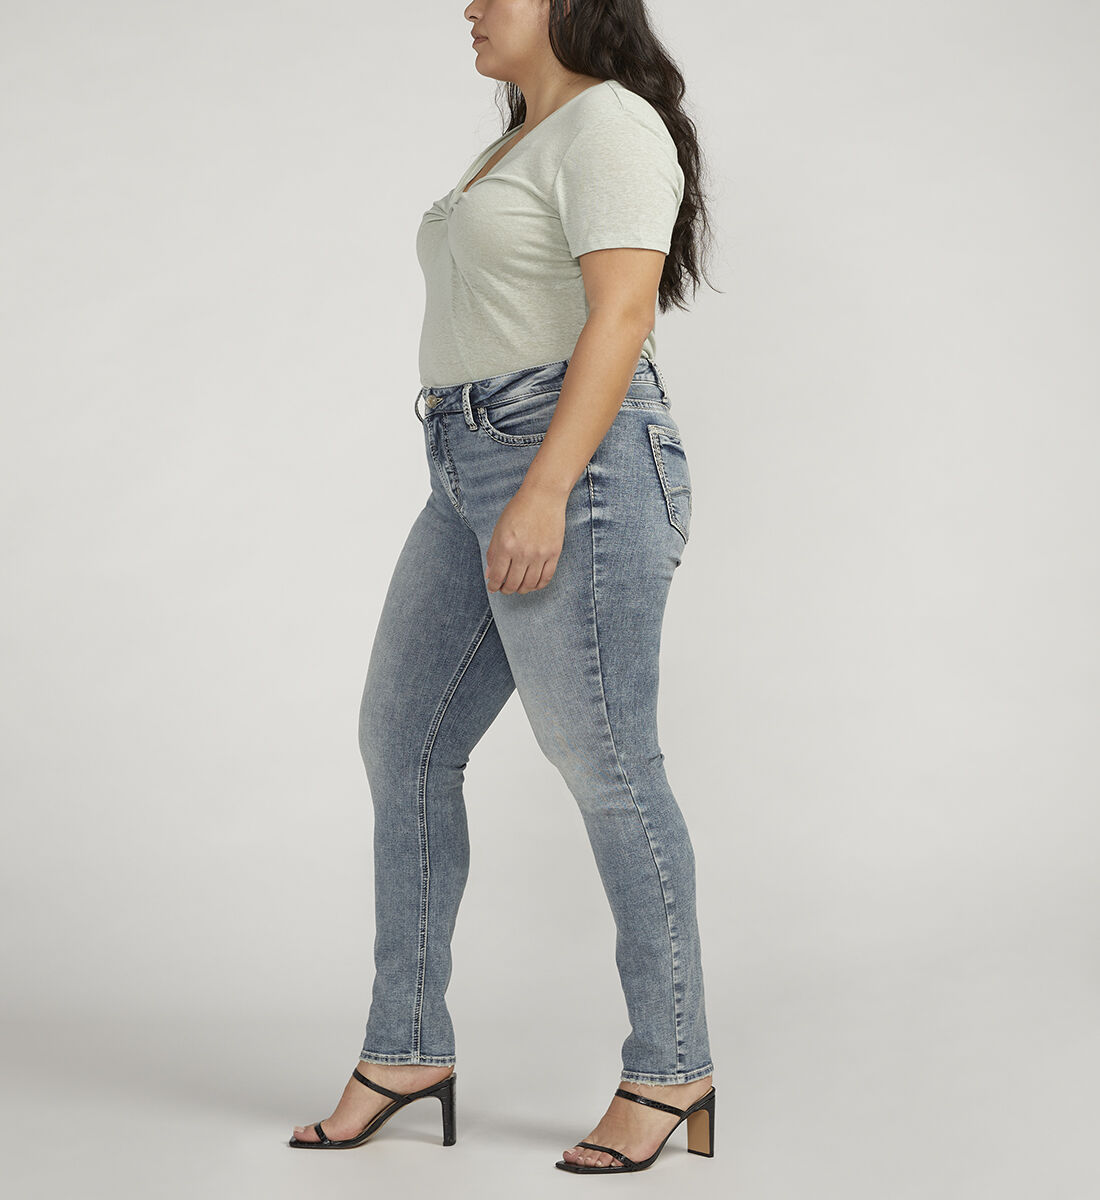 Buy Suki Mid Rise Straight Leg Jeans Plus Size for CAD 108.00 